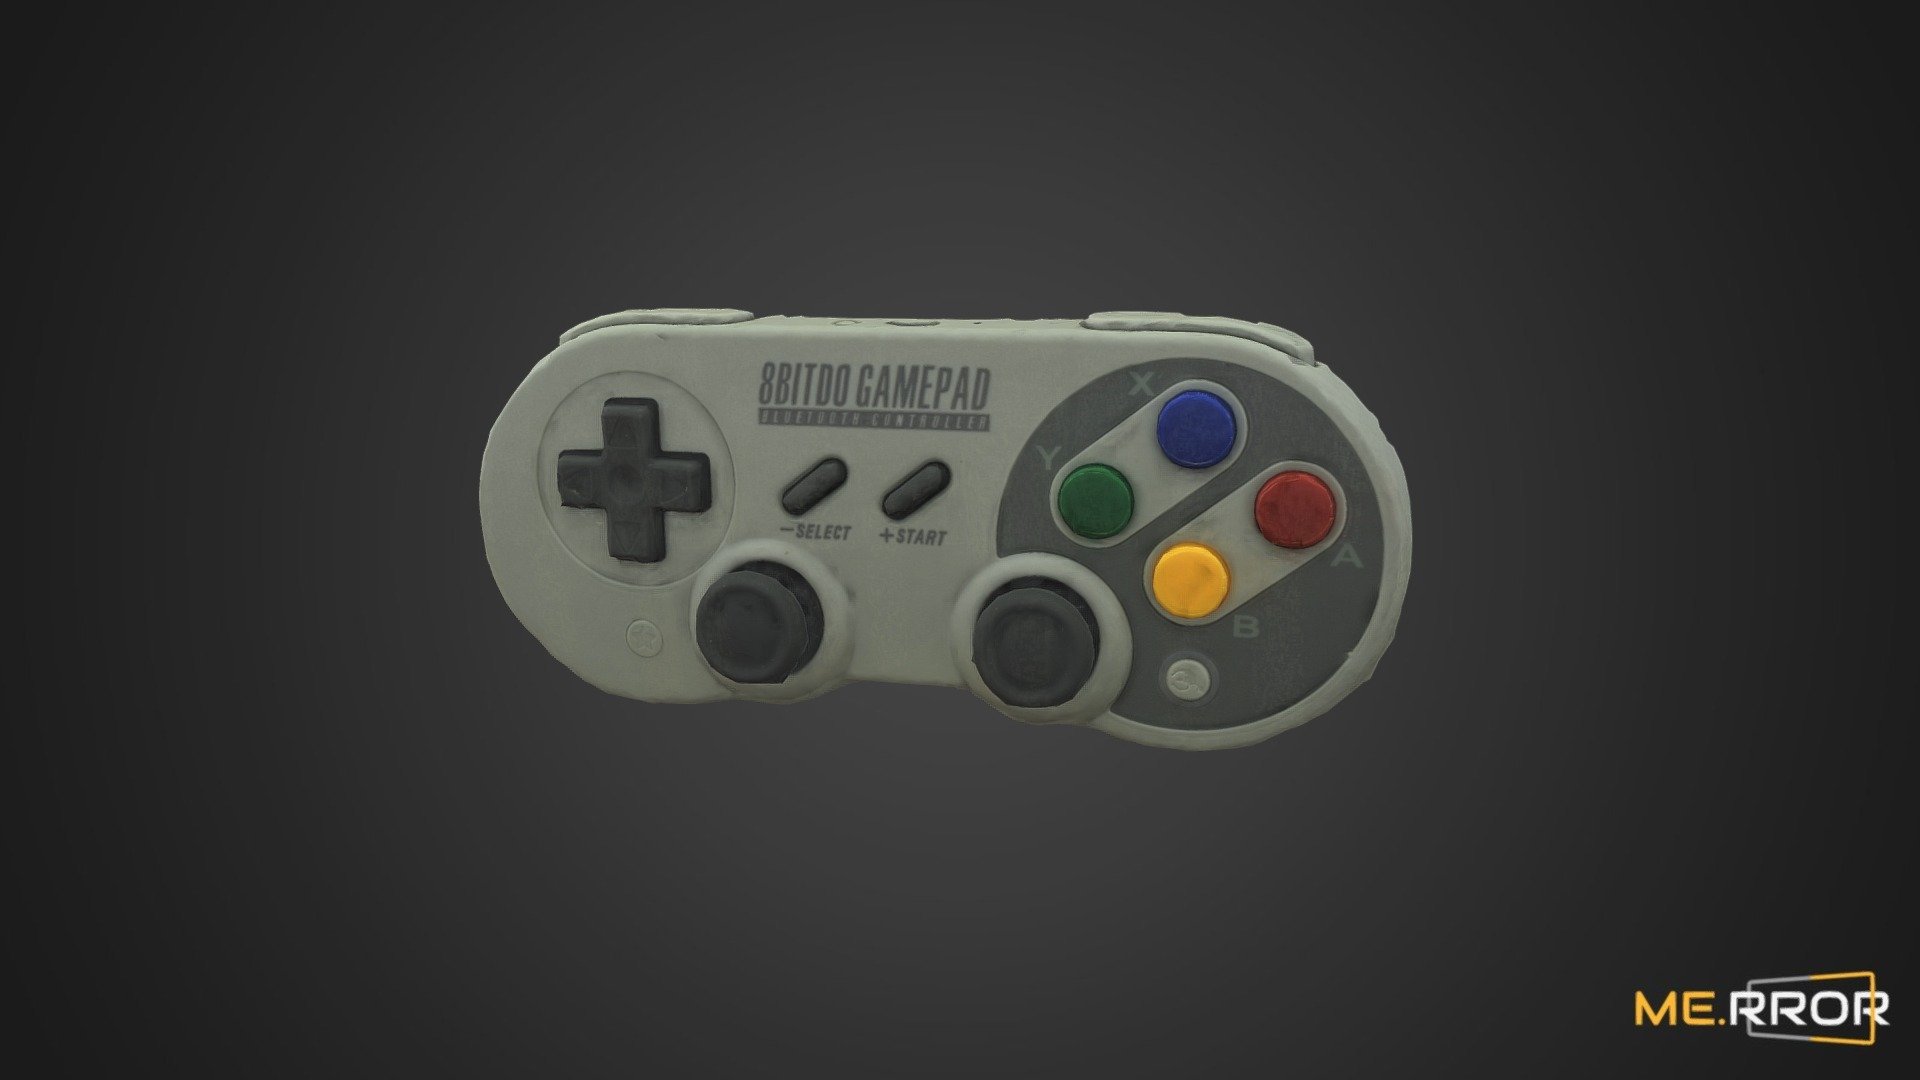 MERROR is a 3D Content PLATFORM which introduces various Asian assets to the 3D world

#3DScanning #Photogrametry #ME.RROR - Super Nintendo Controller - Buy Royalty Free 3D model by ME.RROR (@merror) 3d model